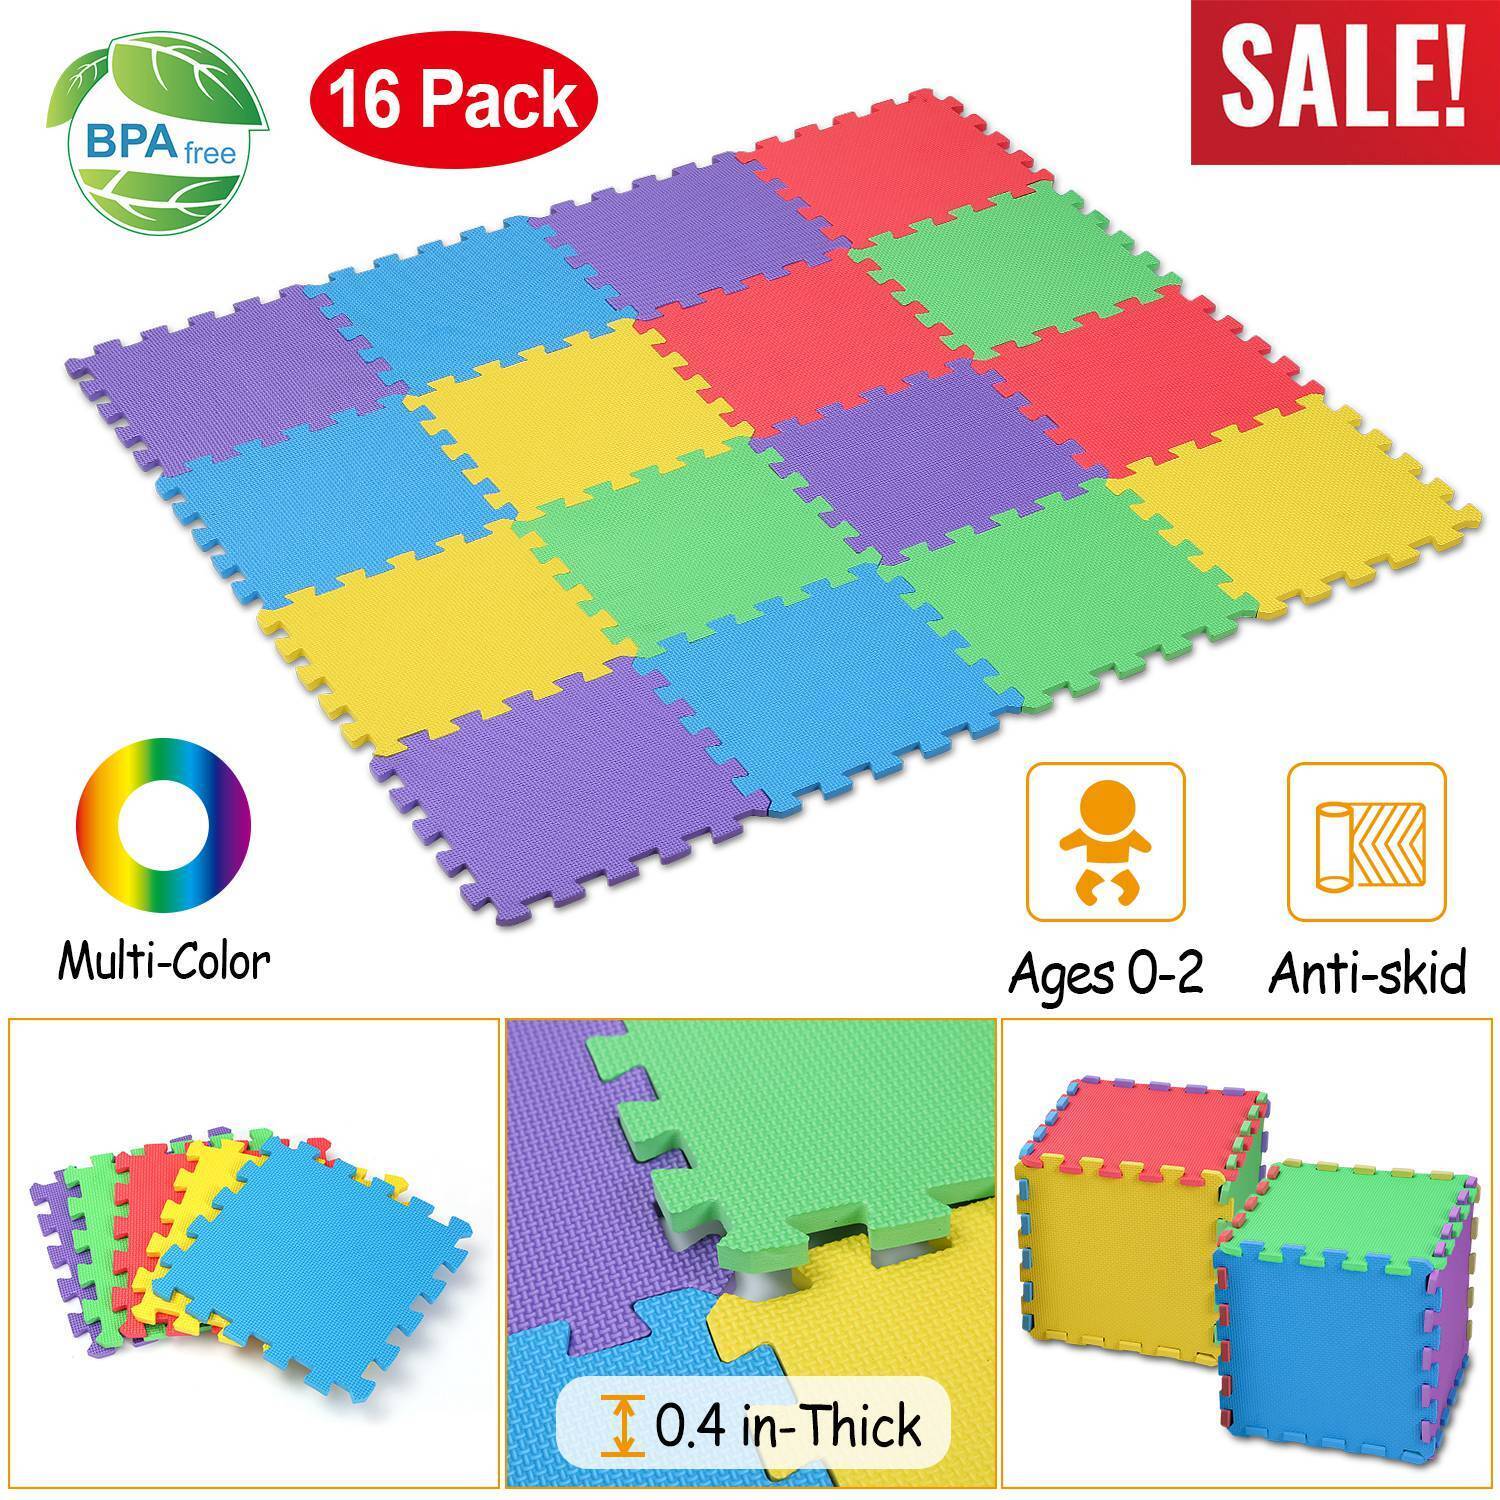 16PCS Play Mat Soft Foam Non-Toxic Exercise Puzzle Baby Children Kids Floor Rug iMounTEK Does Not Apply